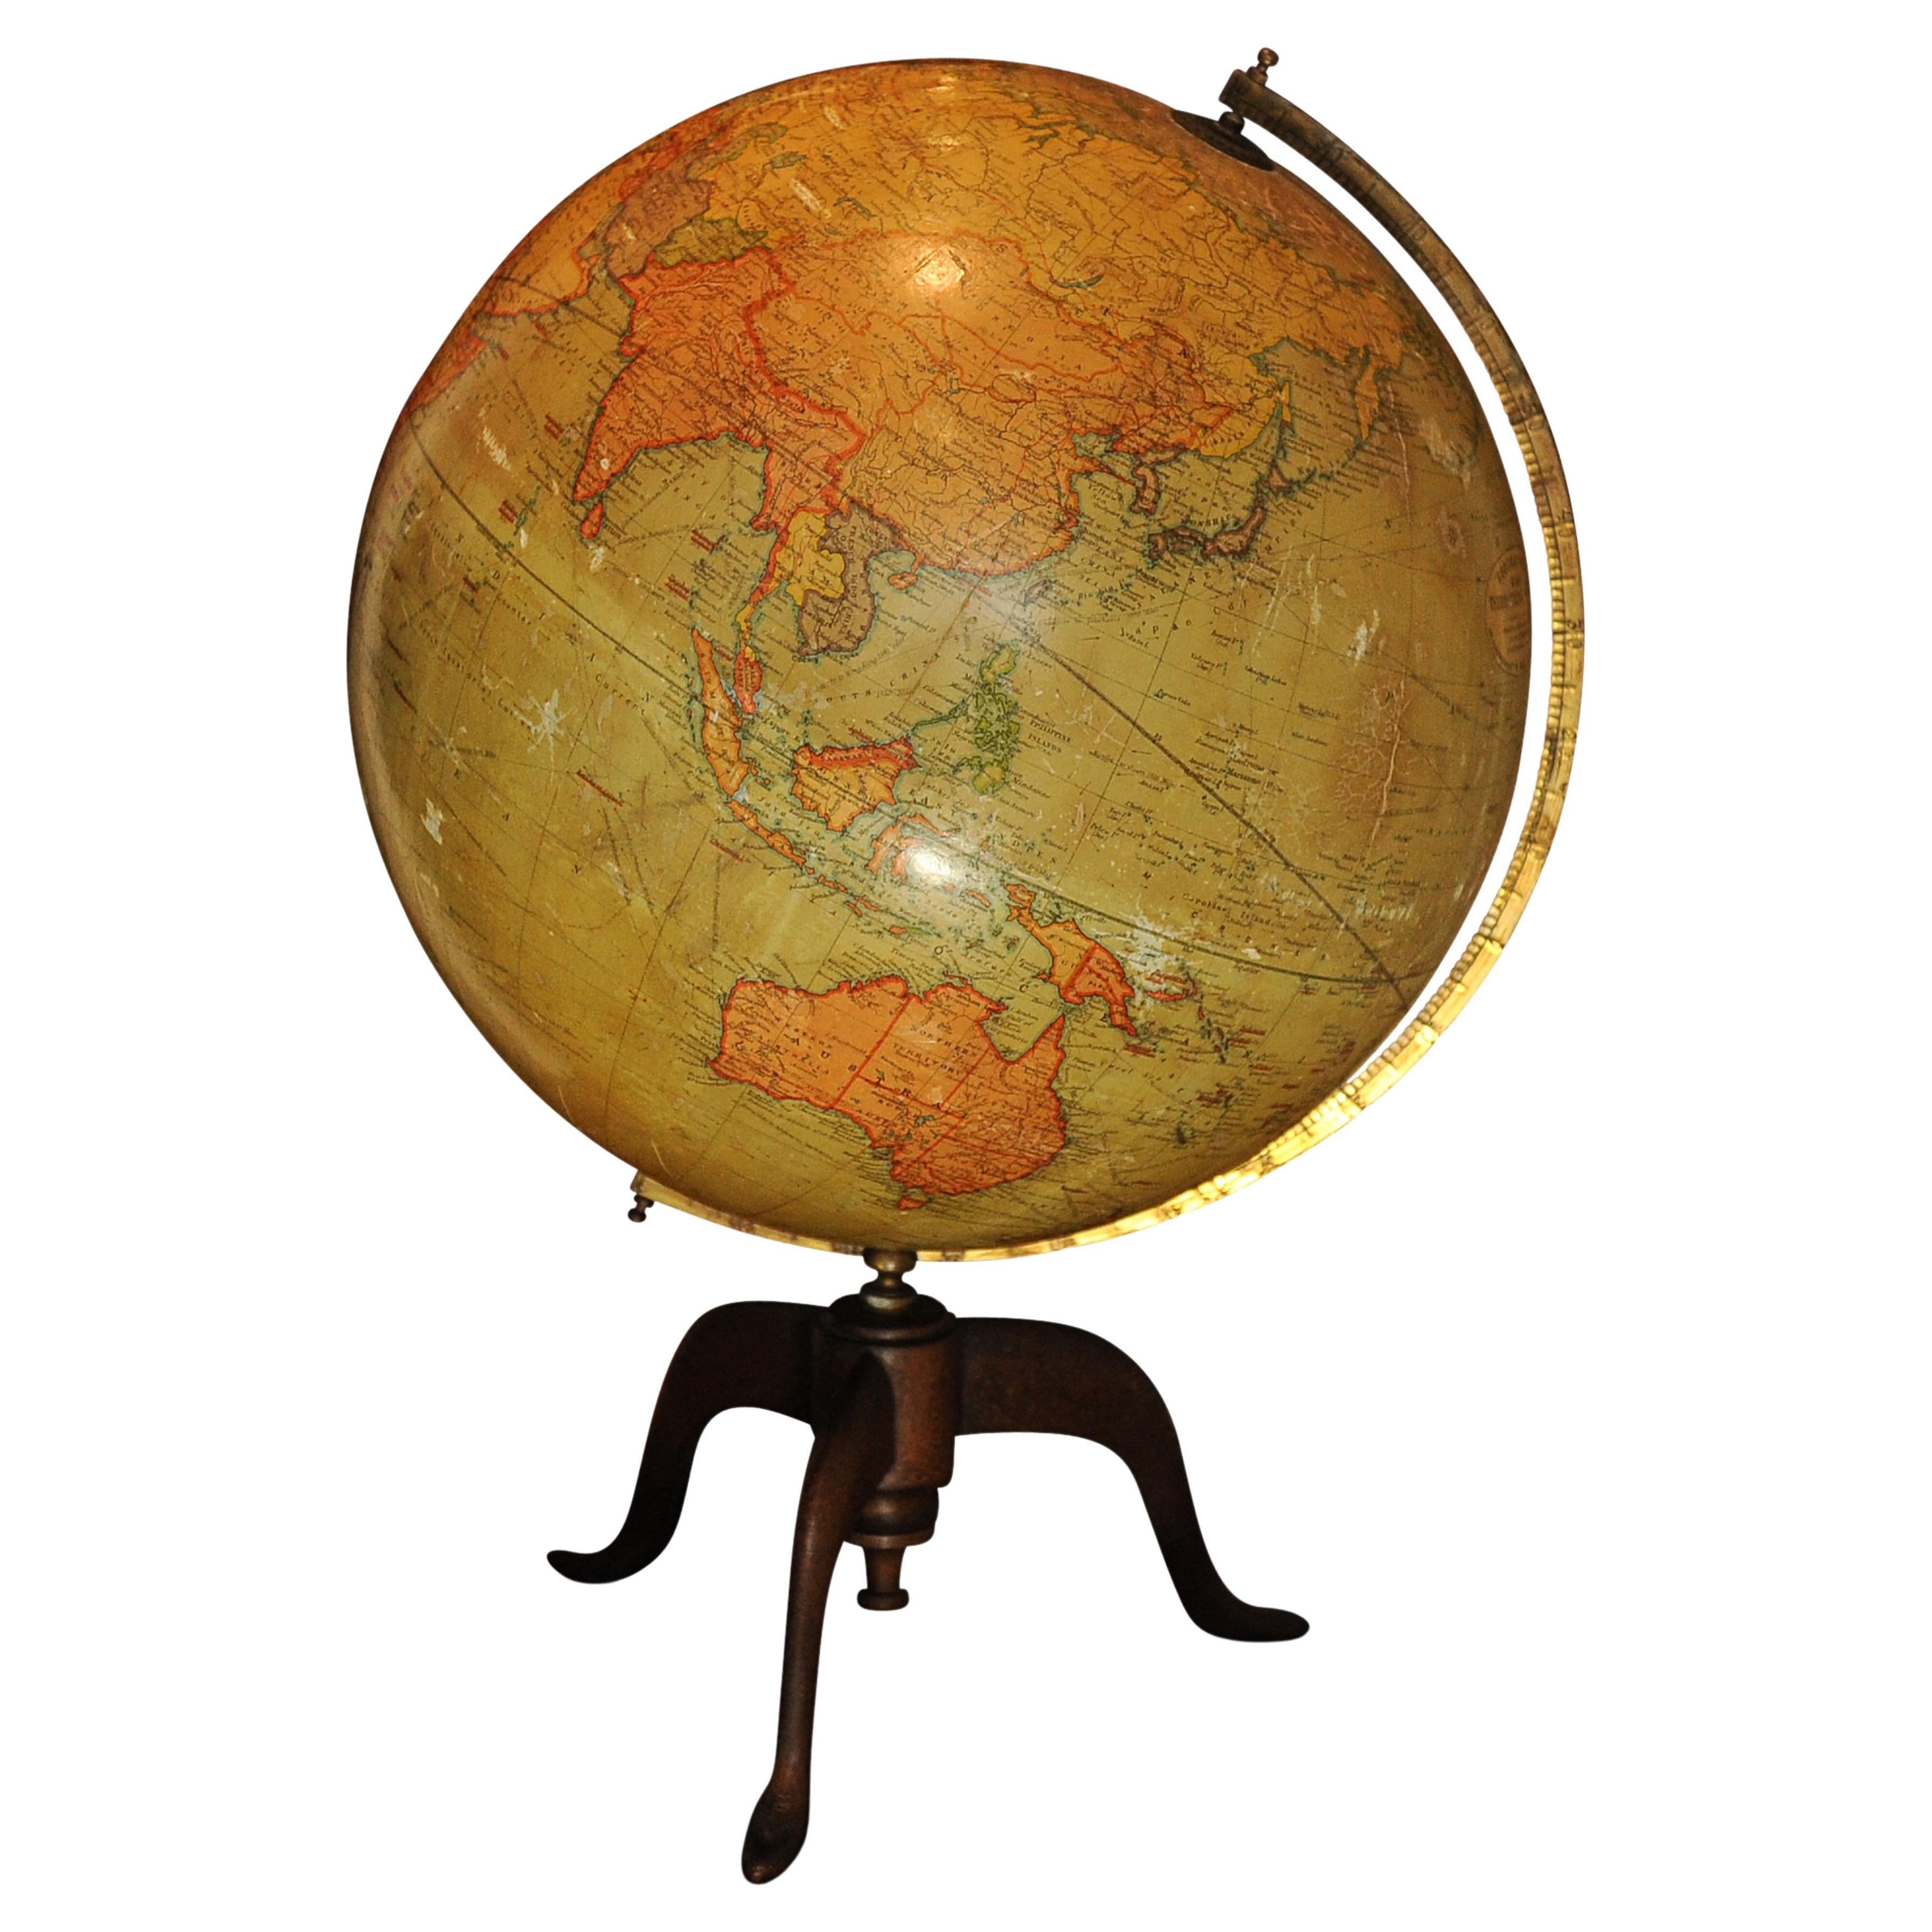 Antique World Globe From Fleet Street London 1923 on Wooden Stand For Sale